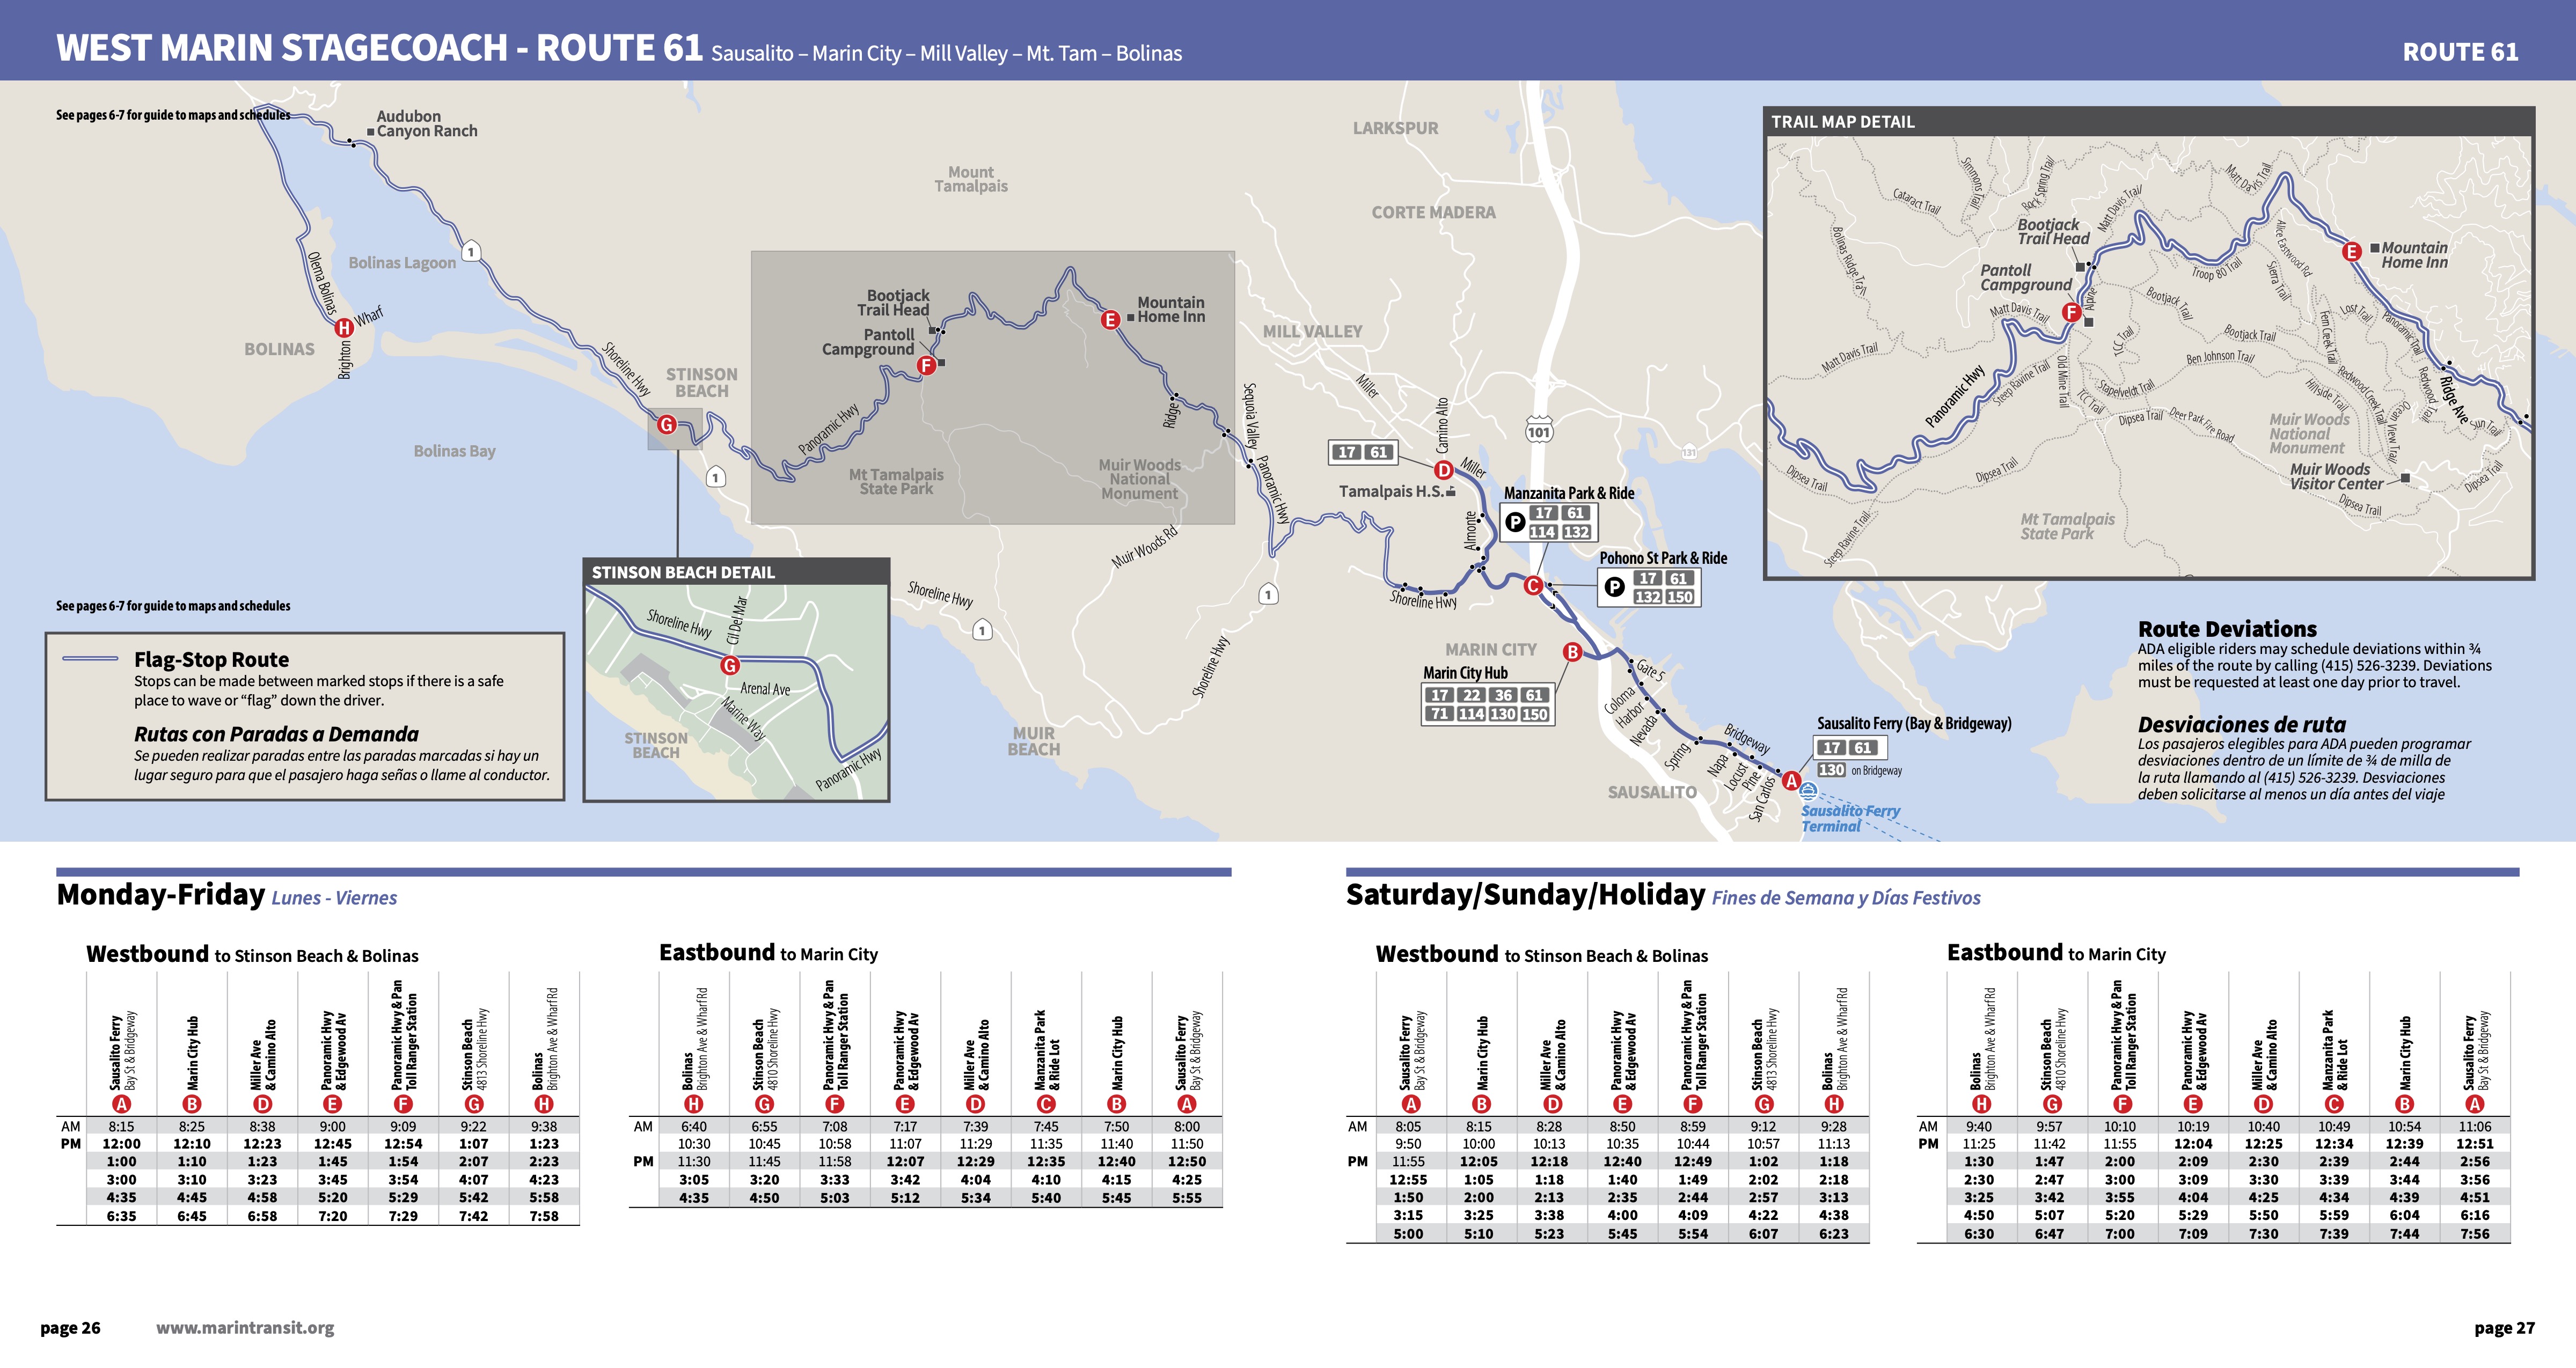 Route 61 New Map and Schedule